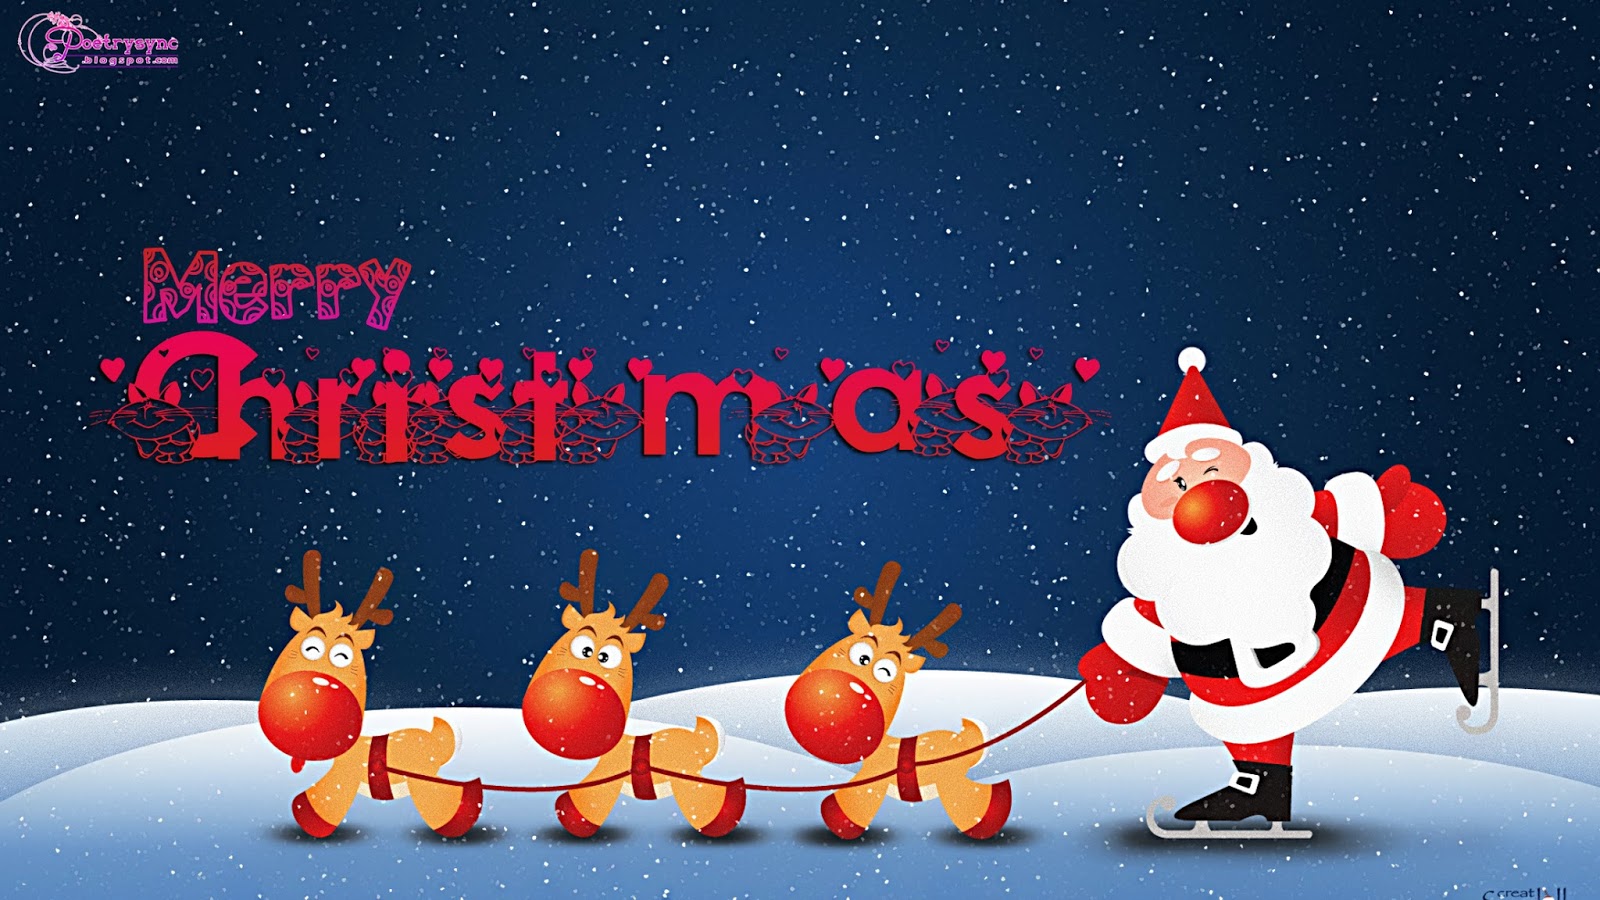 Free download happy new year Christmas Wishes and Greetings Wallpaper with Santa [1600x900] for your Desktop, Mobile & Tablet. Explore Christmas Cartoon Wallpaper. Free Animated Christmas Wallpaper, Animated Christmas